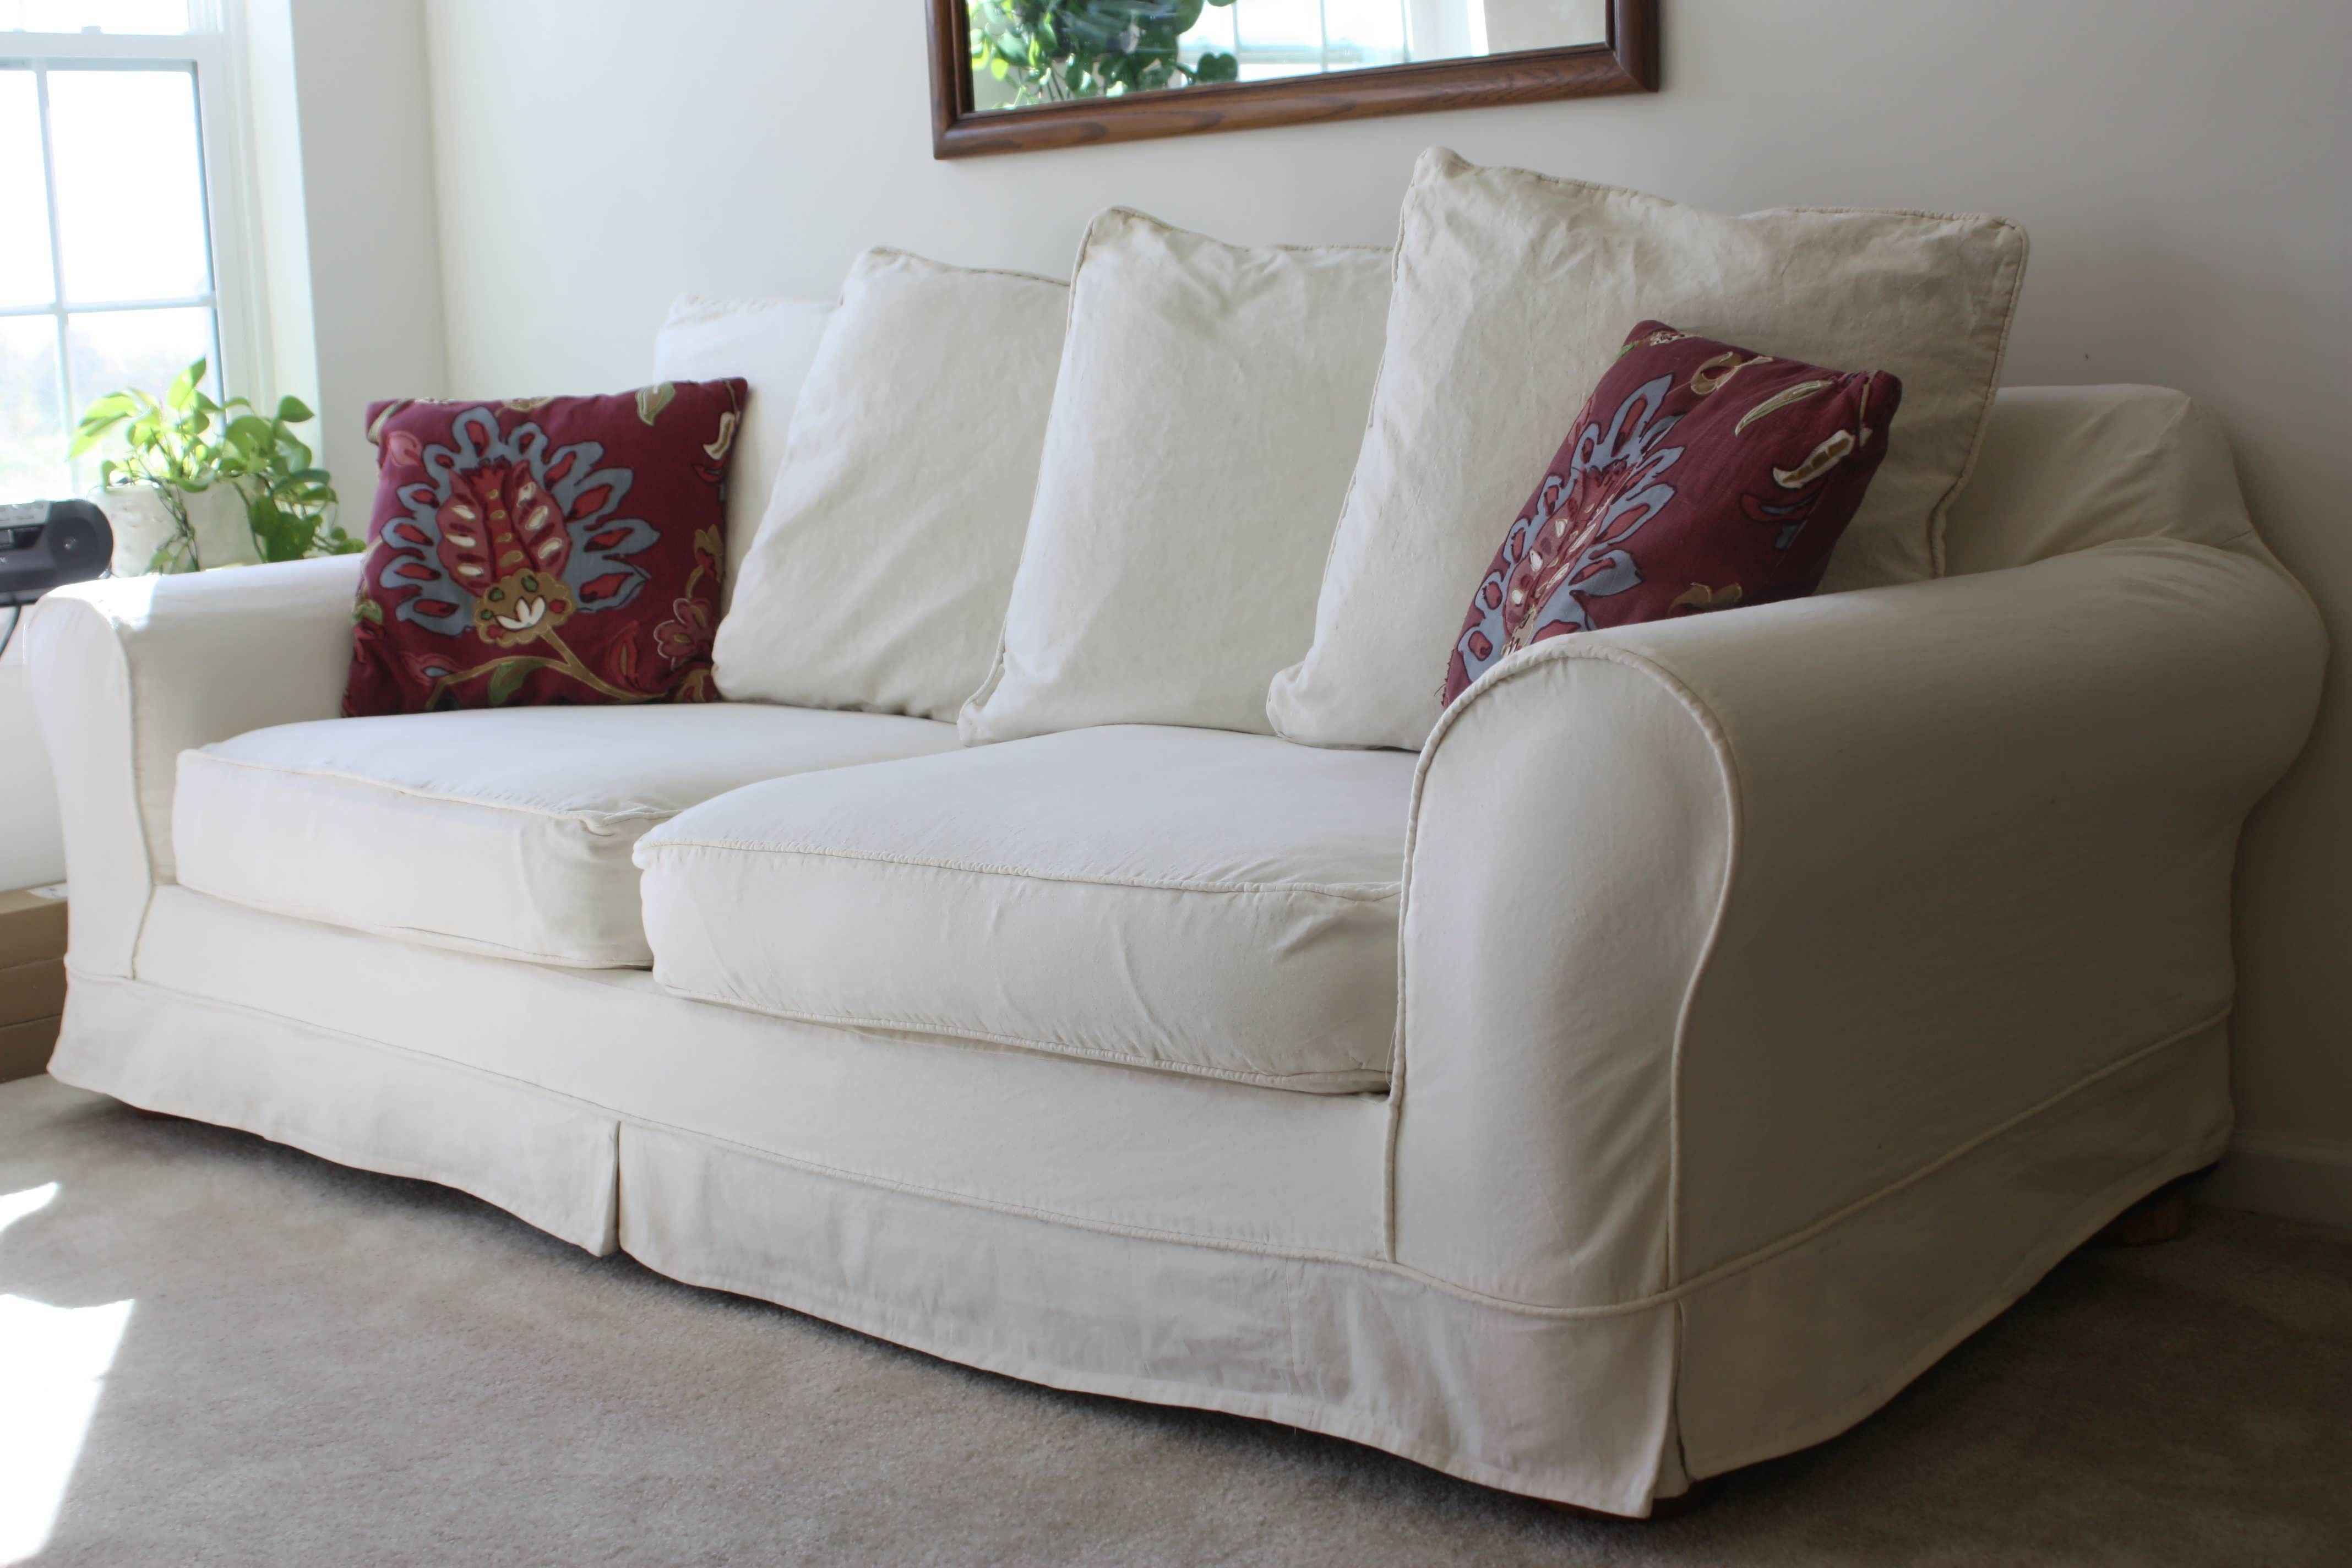 Sofa : 3 Piece Couch Cover Sofa Throw Covers Furniture Covers Sofa Regarding 3 Piece Sofa Slipcovers (View 9 of 15)